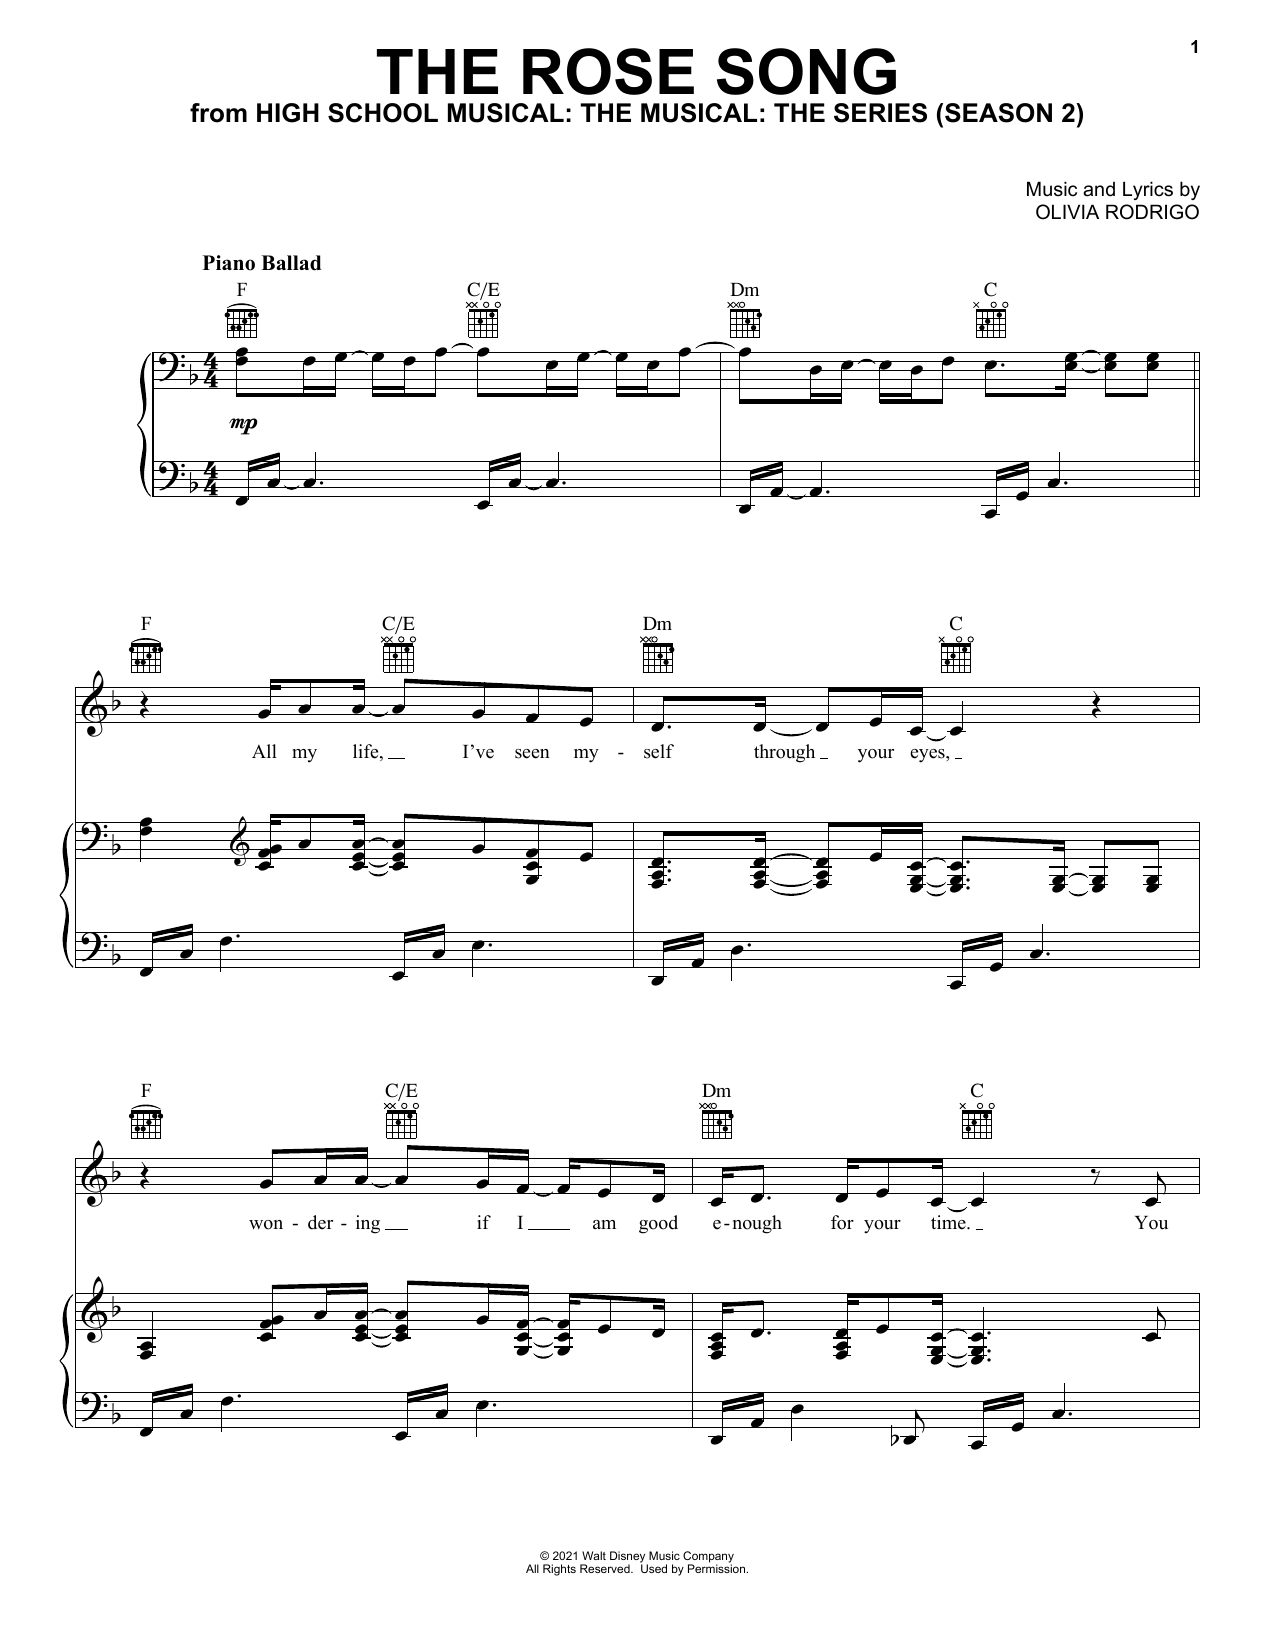 Download Olivia Rodrigo The Rose Song (from High School Musical Sheet Music